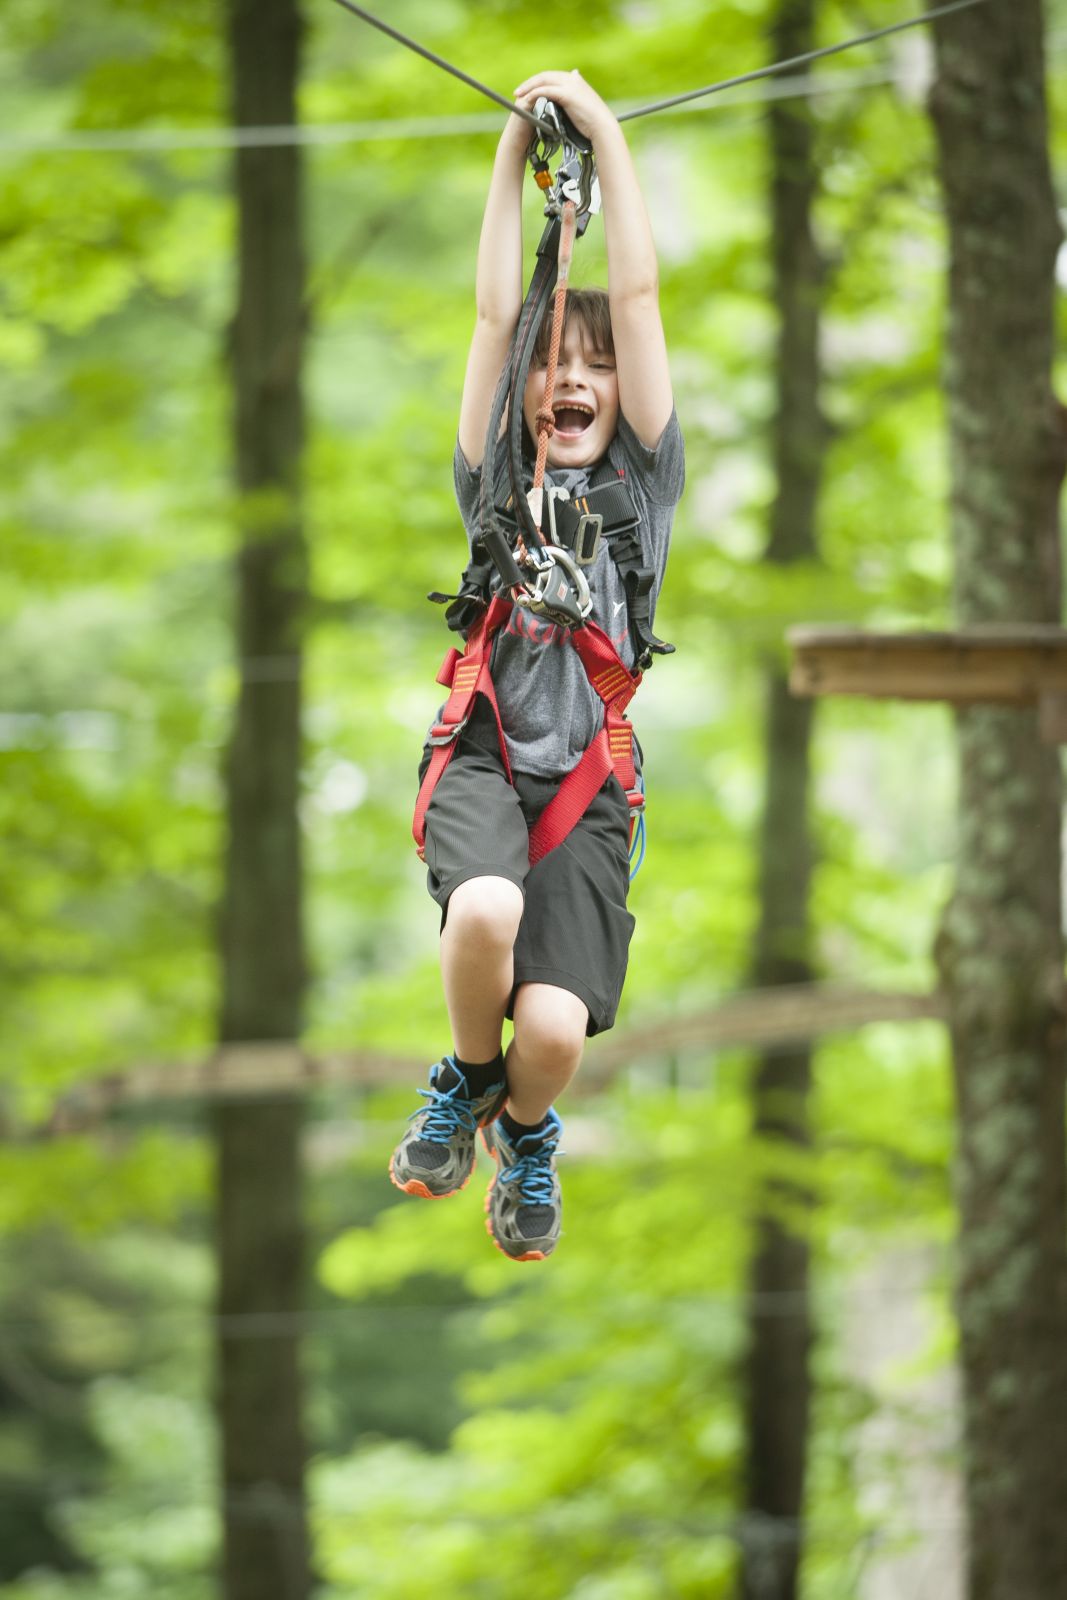 Treetop Thrill Seekers Reach New Heights Photo